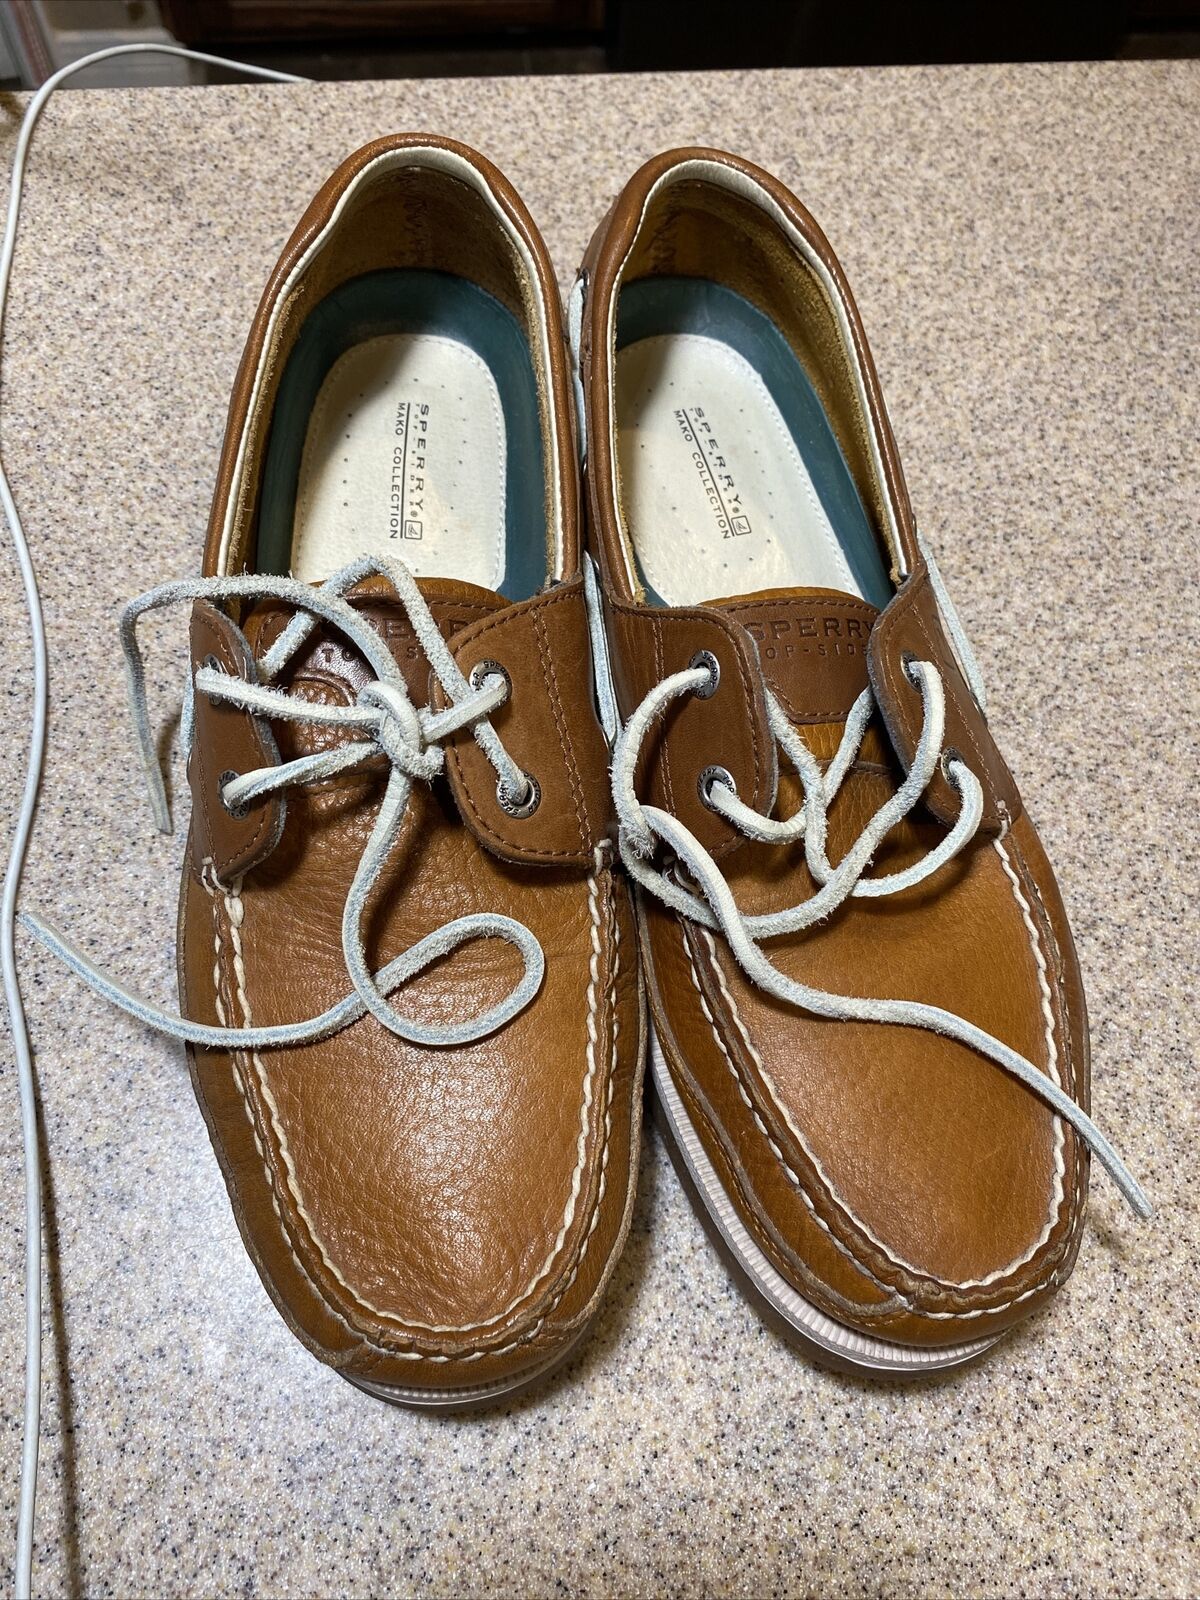 Primary image for Sperry Top-Sider Boat Shoes 10.5 M Brown & White Leather Two-Eye USA